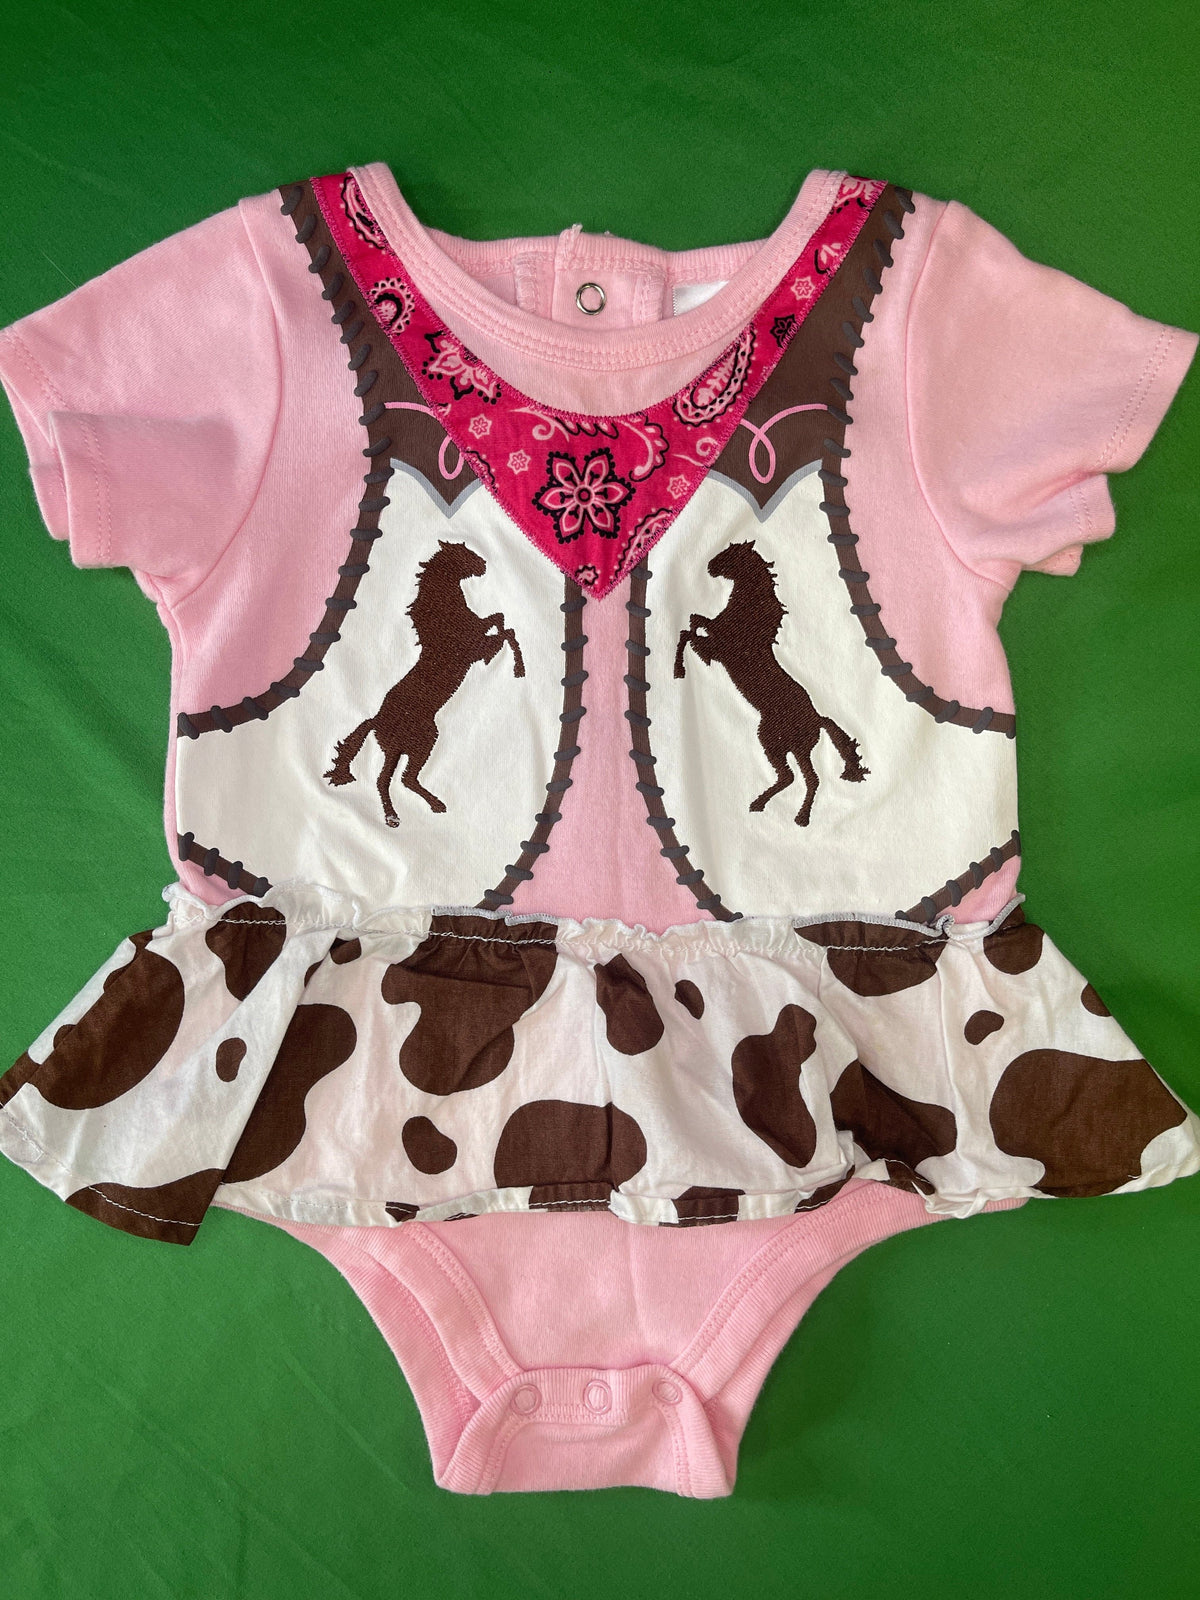 Western Cowgirl Cotton Pink Decorated Bodysuit Infant 12 months